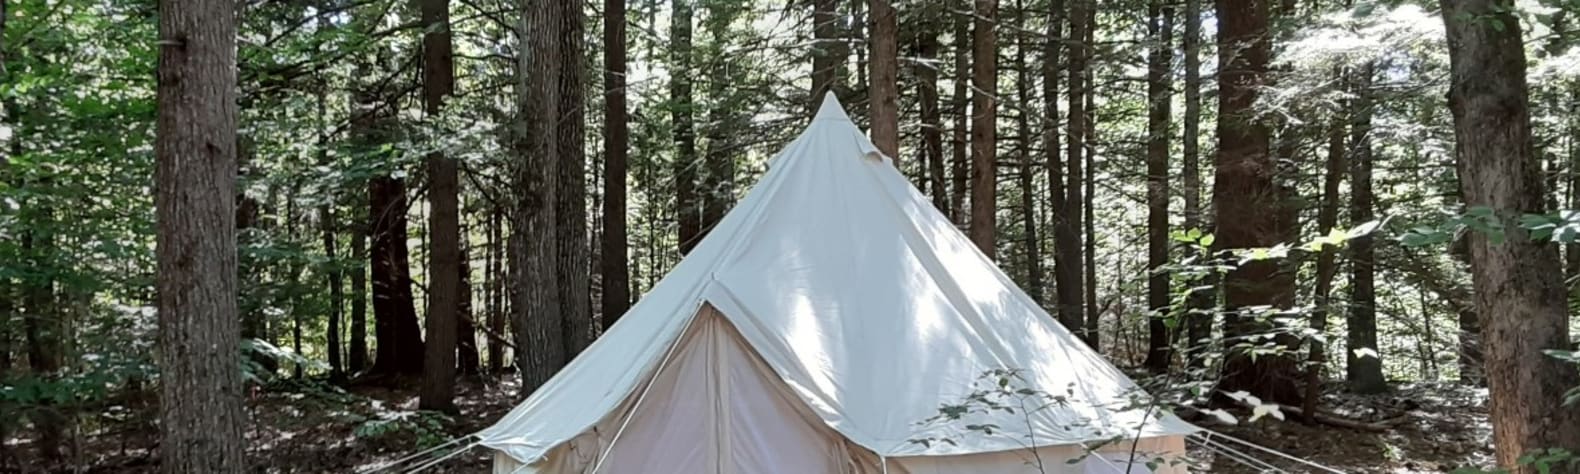 Maine Secluded Yurt-Tent.